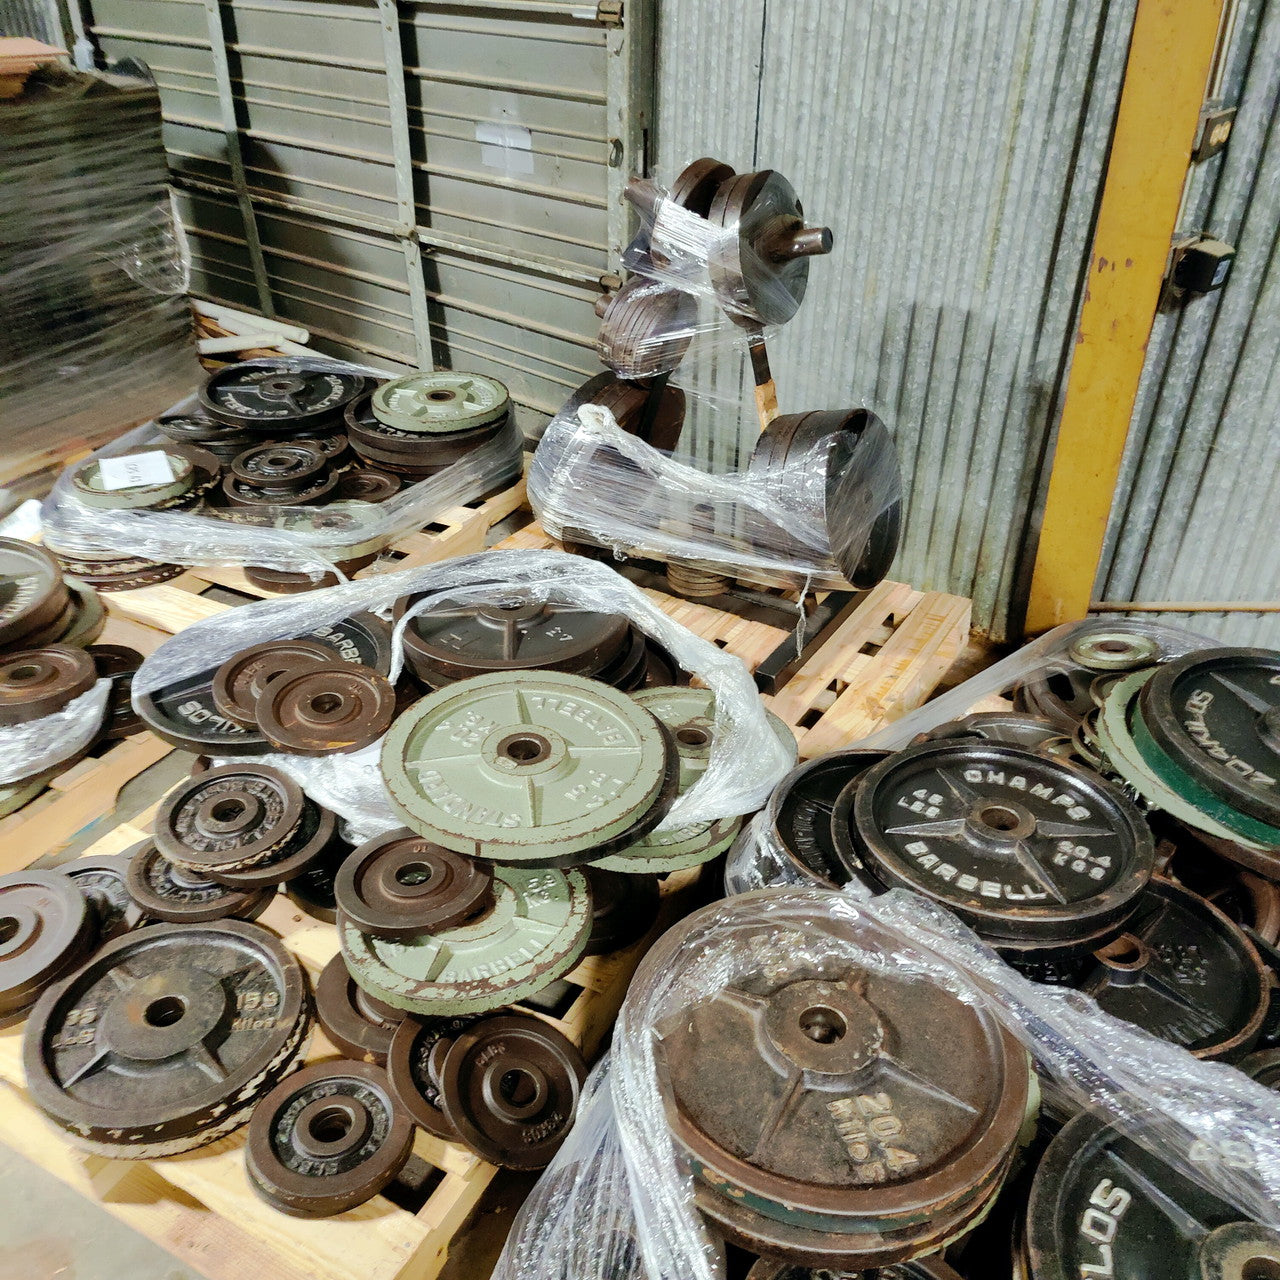 Used Olympic Weight Plates Cast Iron All Sizes 45-2.5lb